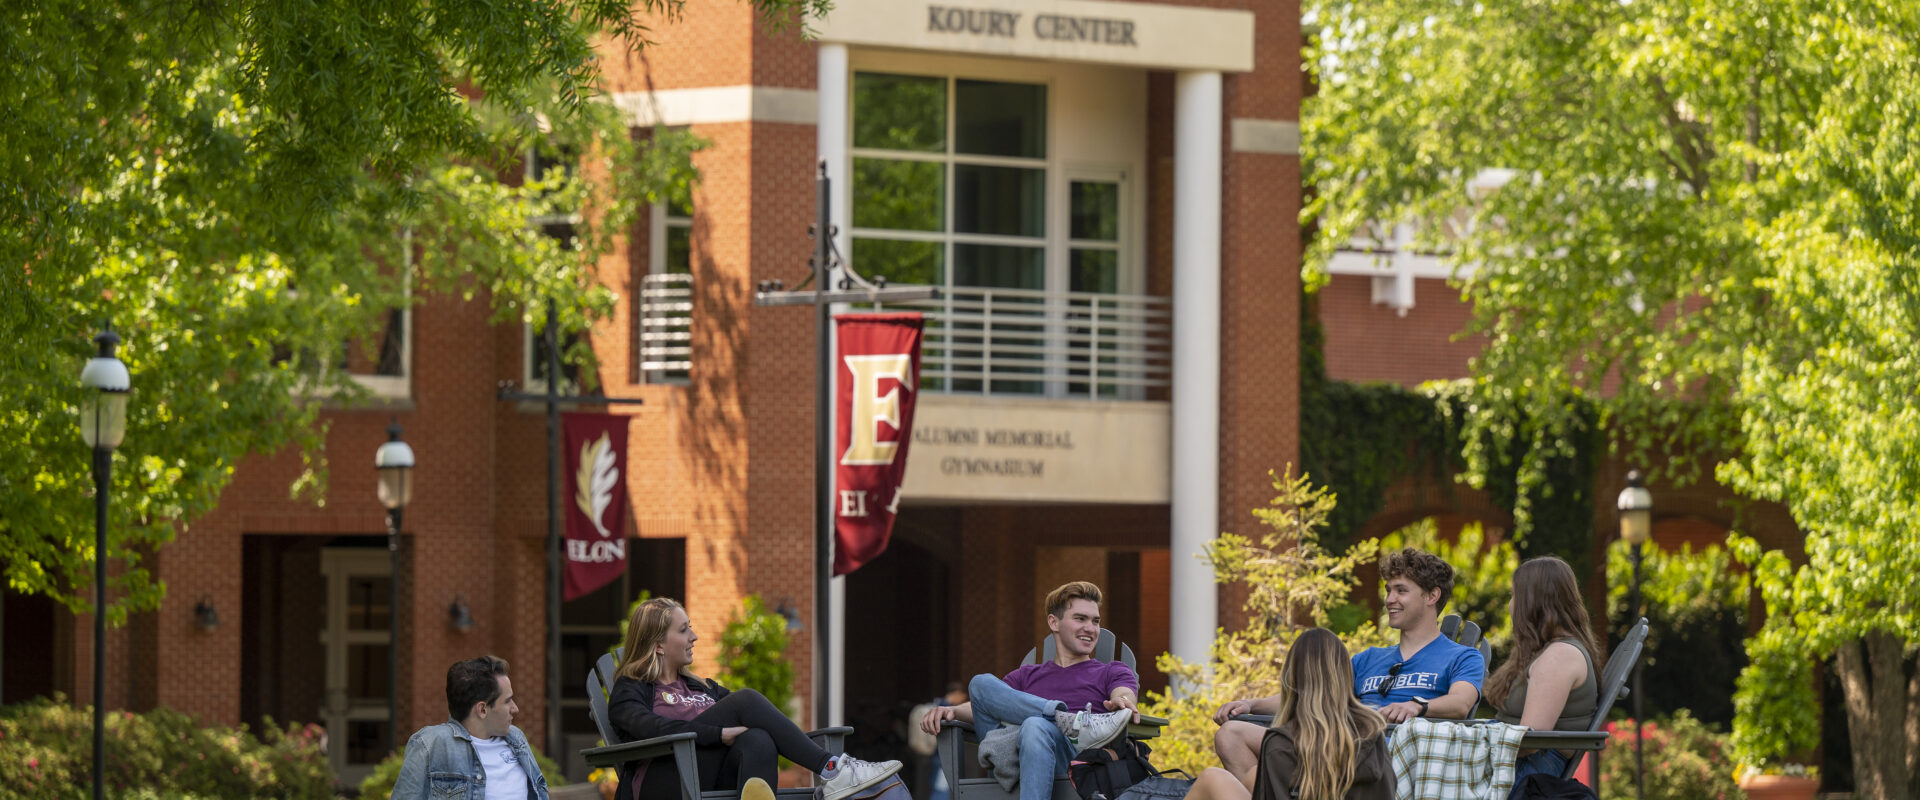 Group of students sit in lawn chairs outside the Koury Center at Elon University